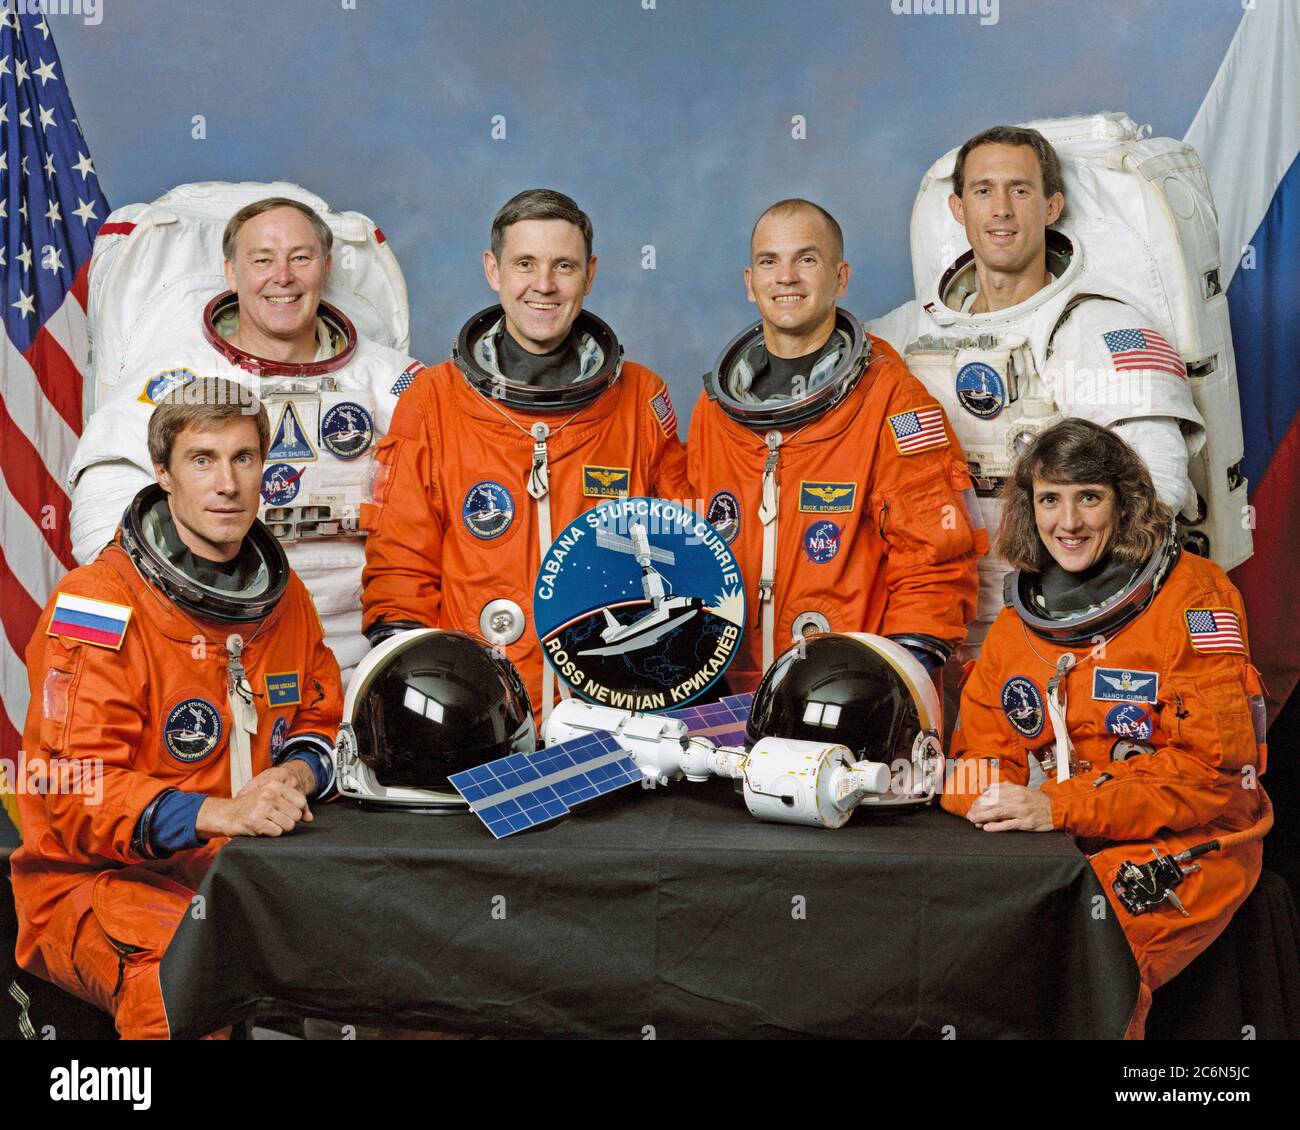 (November 1998) --- Five NASA astronauts and a Russian cosmonaut assigned to the mission, scheduled for an early December 1998 launch, take time out from their busy training agenda for a crew portrait. Seated in front are Sergei K. Krikalev, a mission specialist representing the Russian Space Agency (RSA), and astronaut Nancy J. Currie, mission specialist. In the rear, from the left, are astronauts Jerry L. Ross, mission specialist; Robert D. Cabana, mission commander; Frederick W. Sturckow, pilot; and James H. Newman, mission specialist. Stock Photo